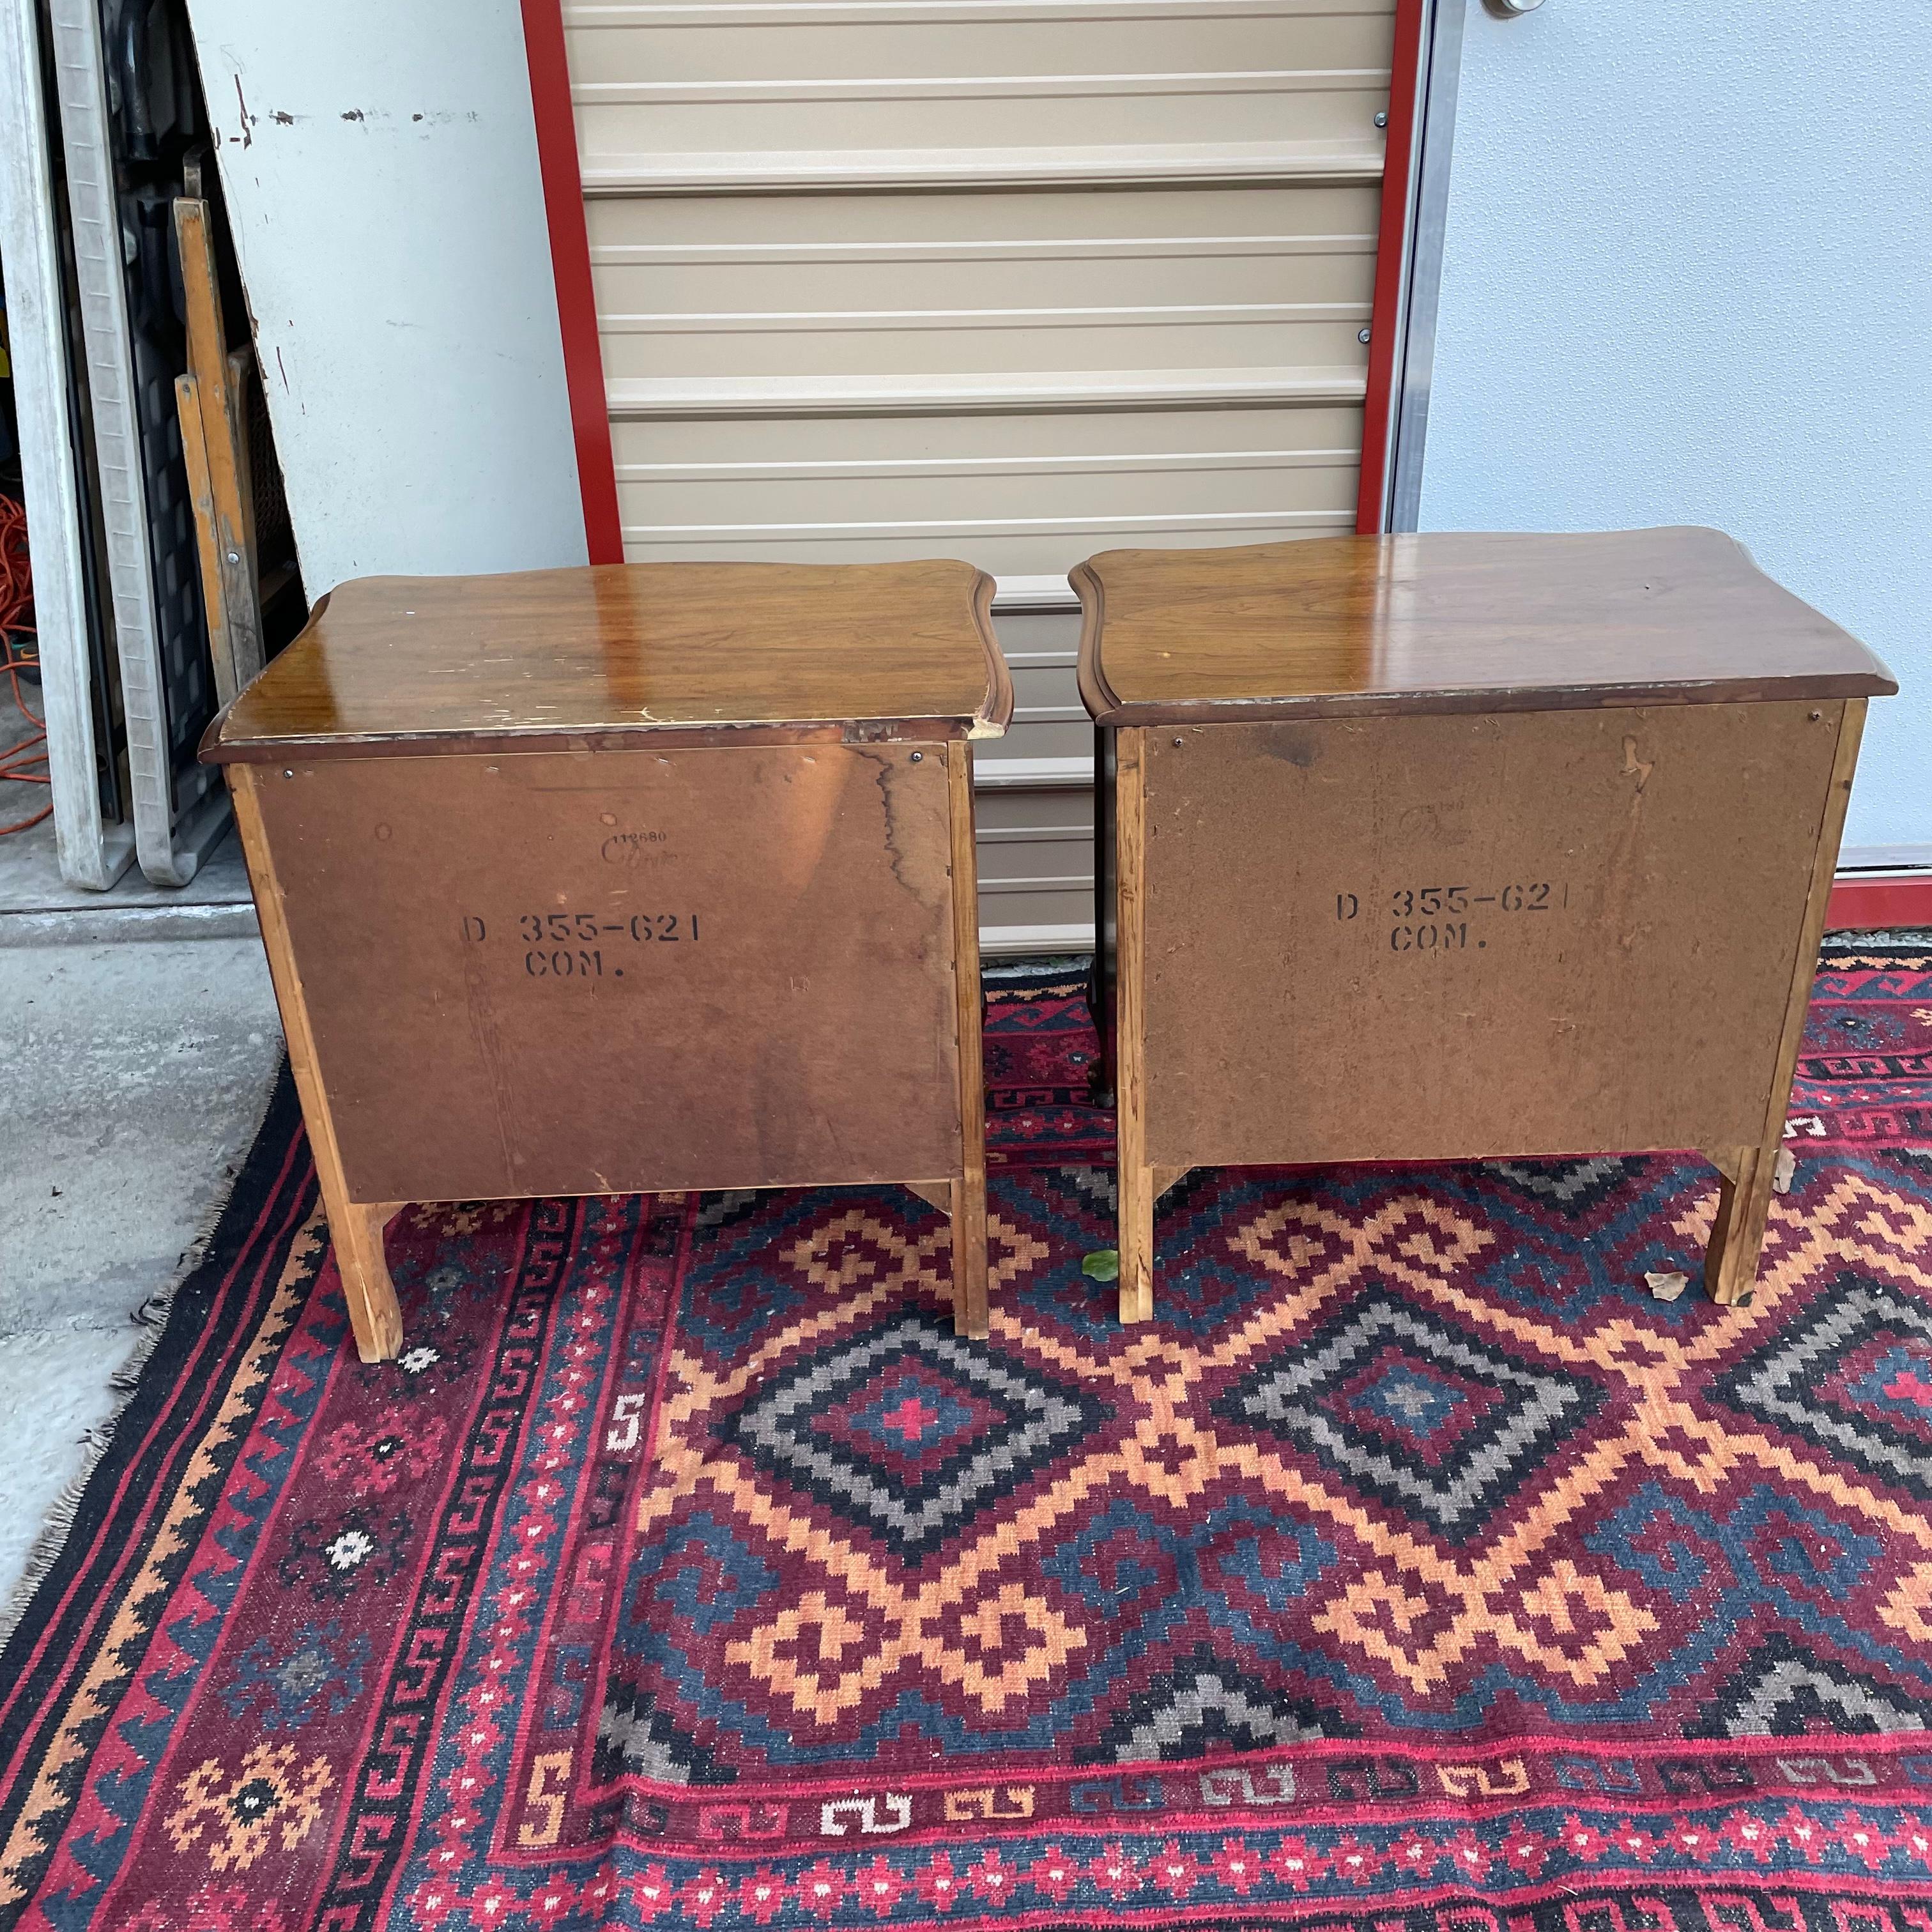 Pair of Dixie French Provinicial nightstands. Both could use a little work. However both are structurally sound and do not wobble in the least. The top to both nightstands could use refinishing. Either that or you could have them both painted in